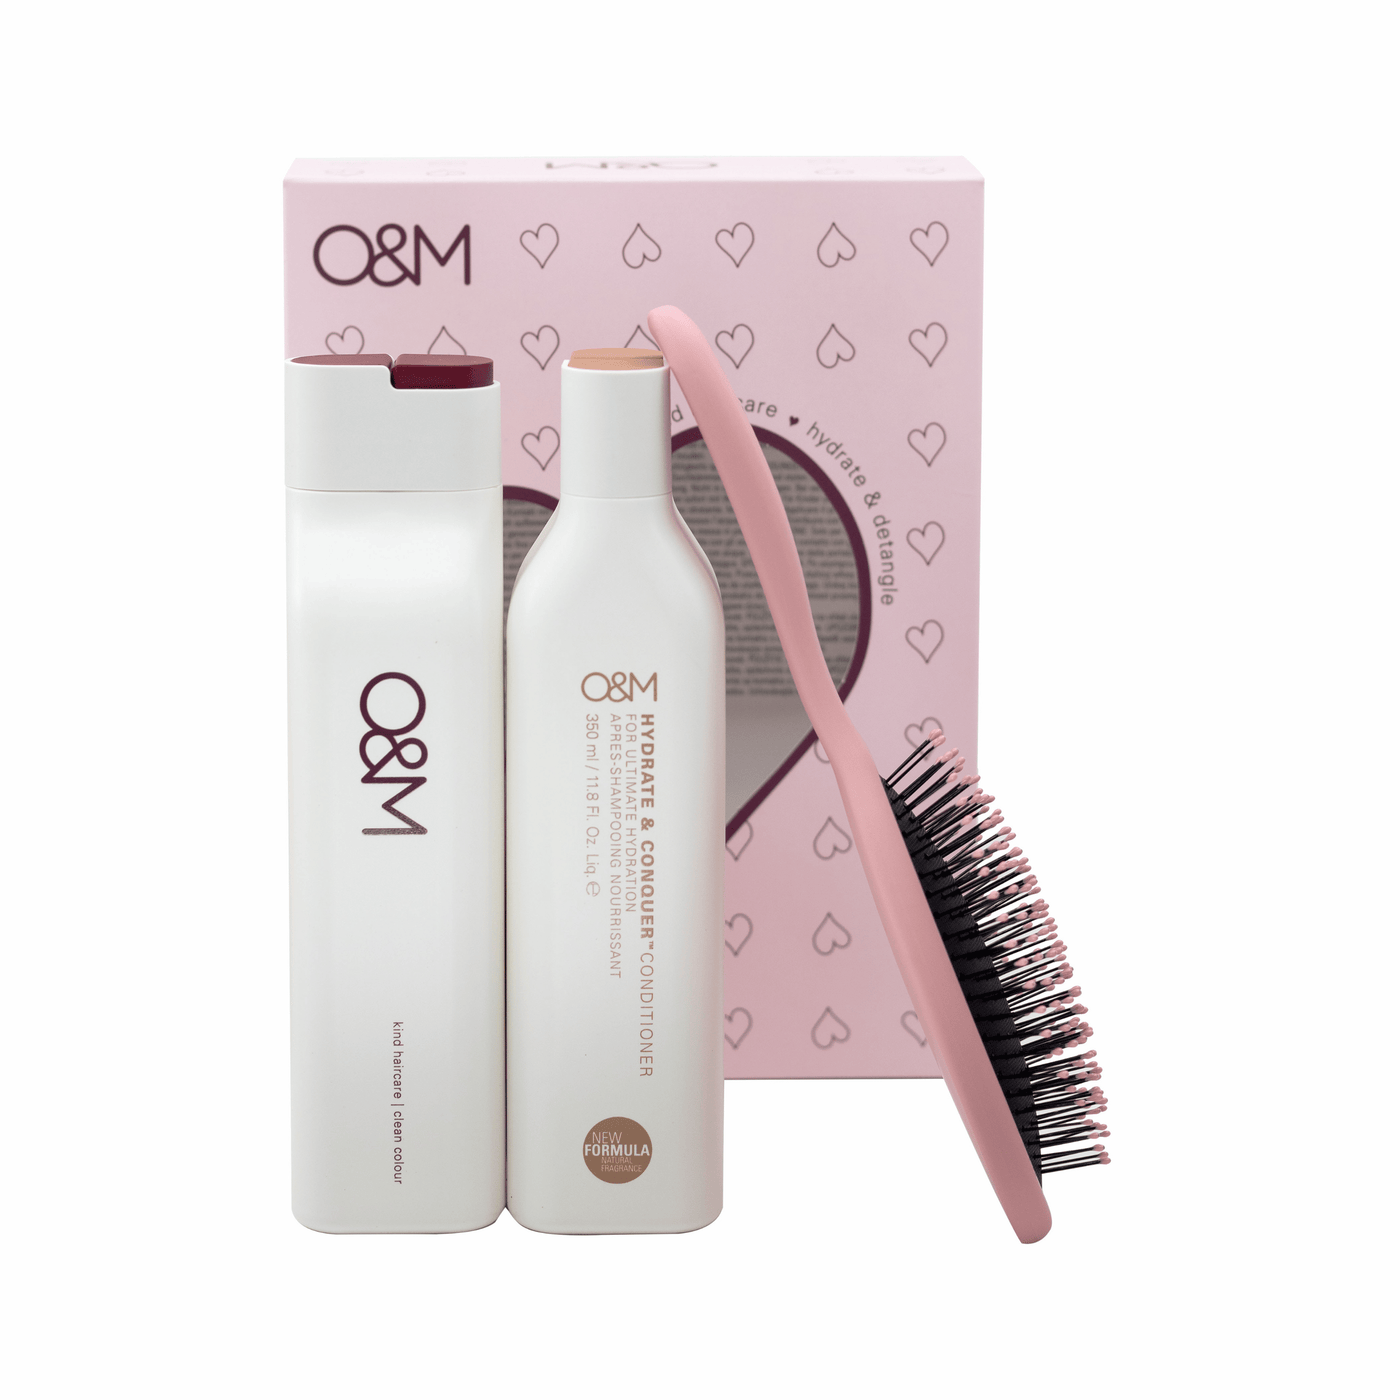 O&M Haircare Packs O&M Hydrate Tangle Free Gift Pack